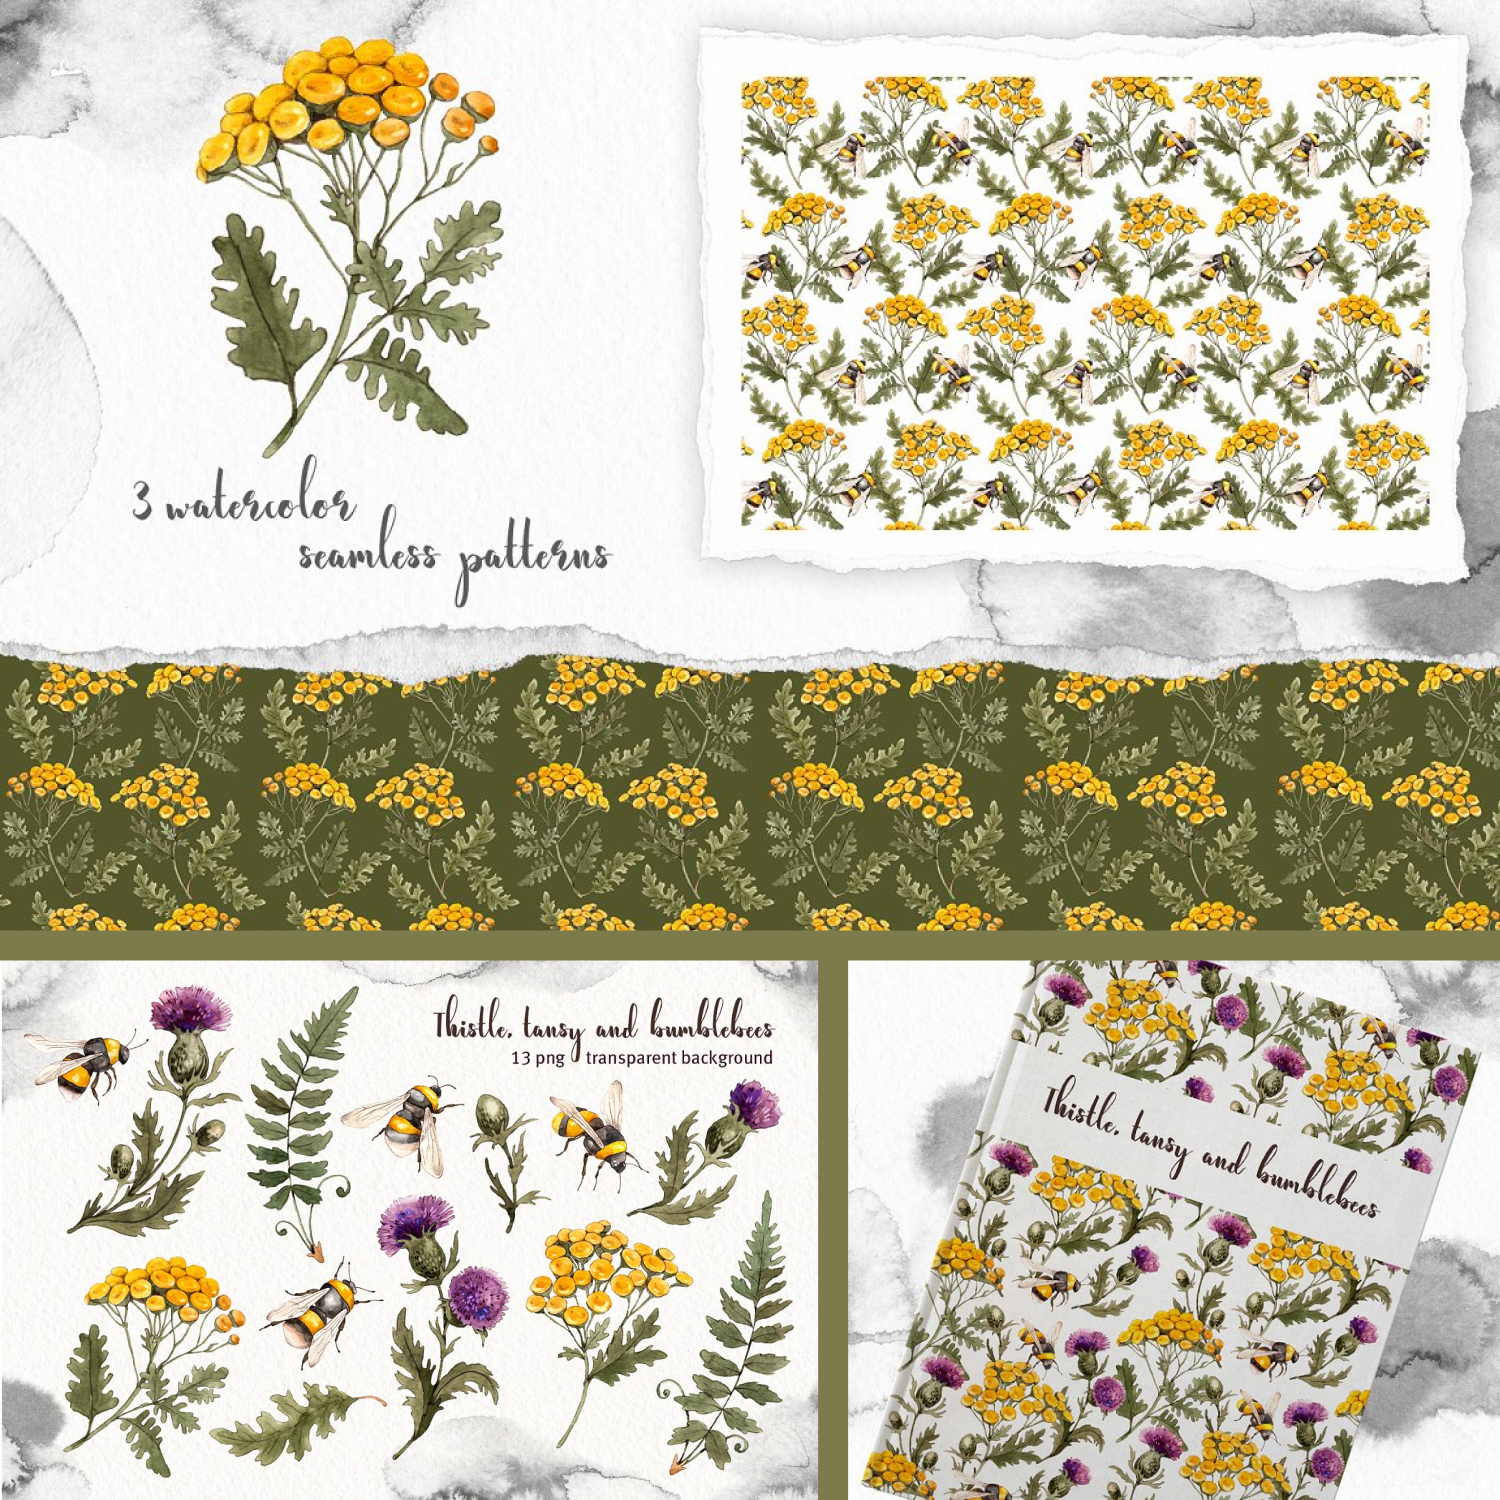 Thistle tansy bumblebees watercolor of pinterest.